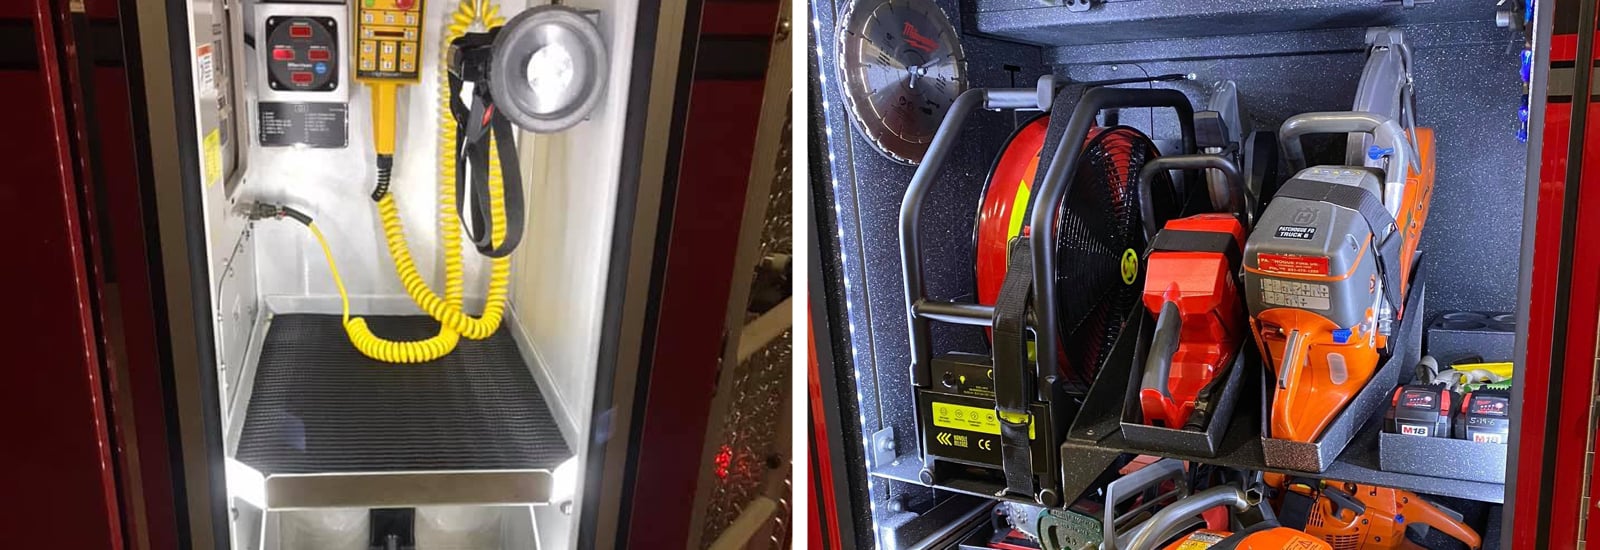 Two images show how compartment lighting can look on a fire truck.